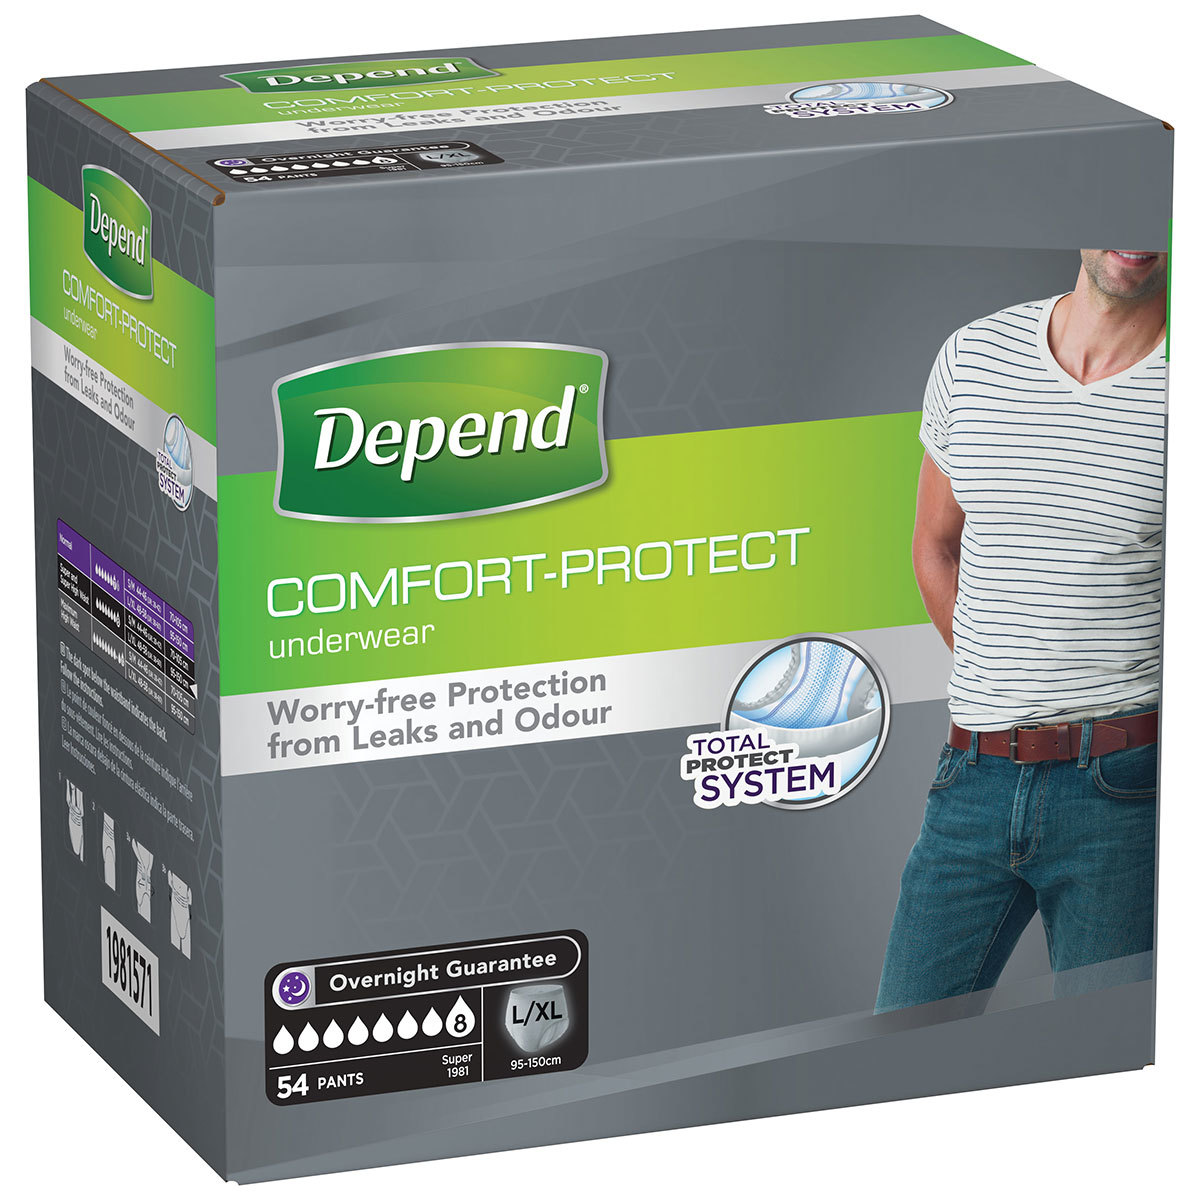 Image of Depend comfort protect mens underwear packaging